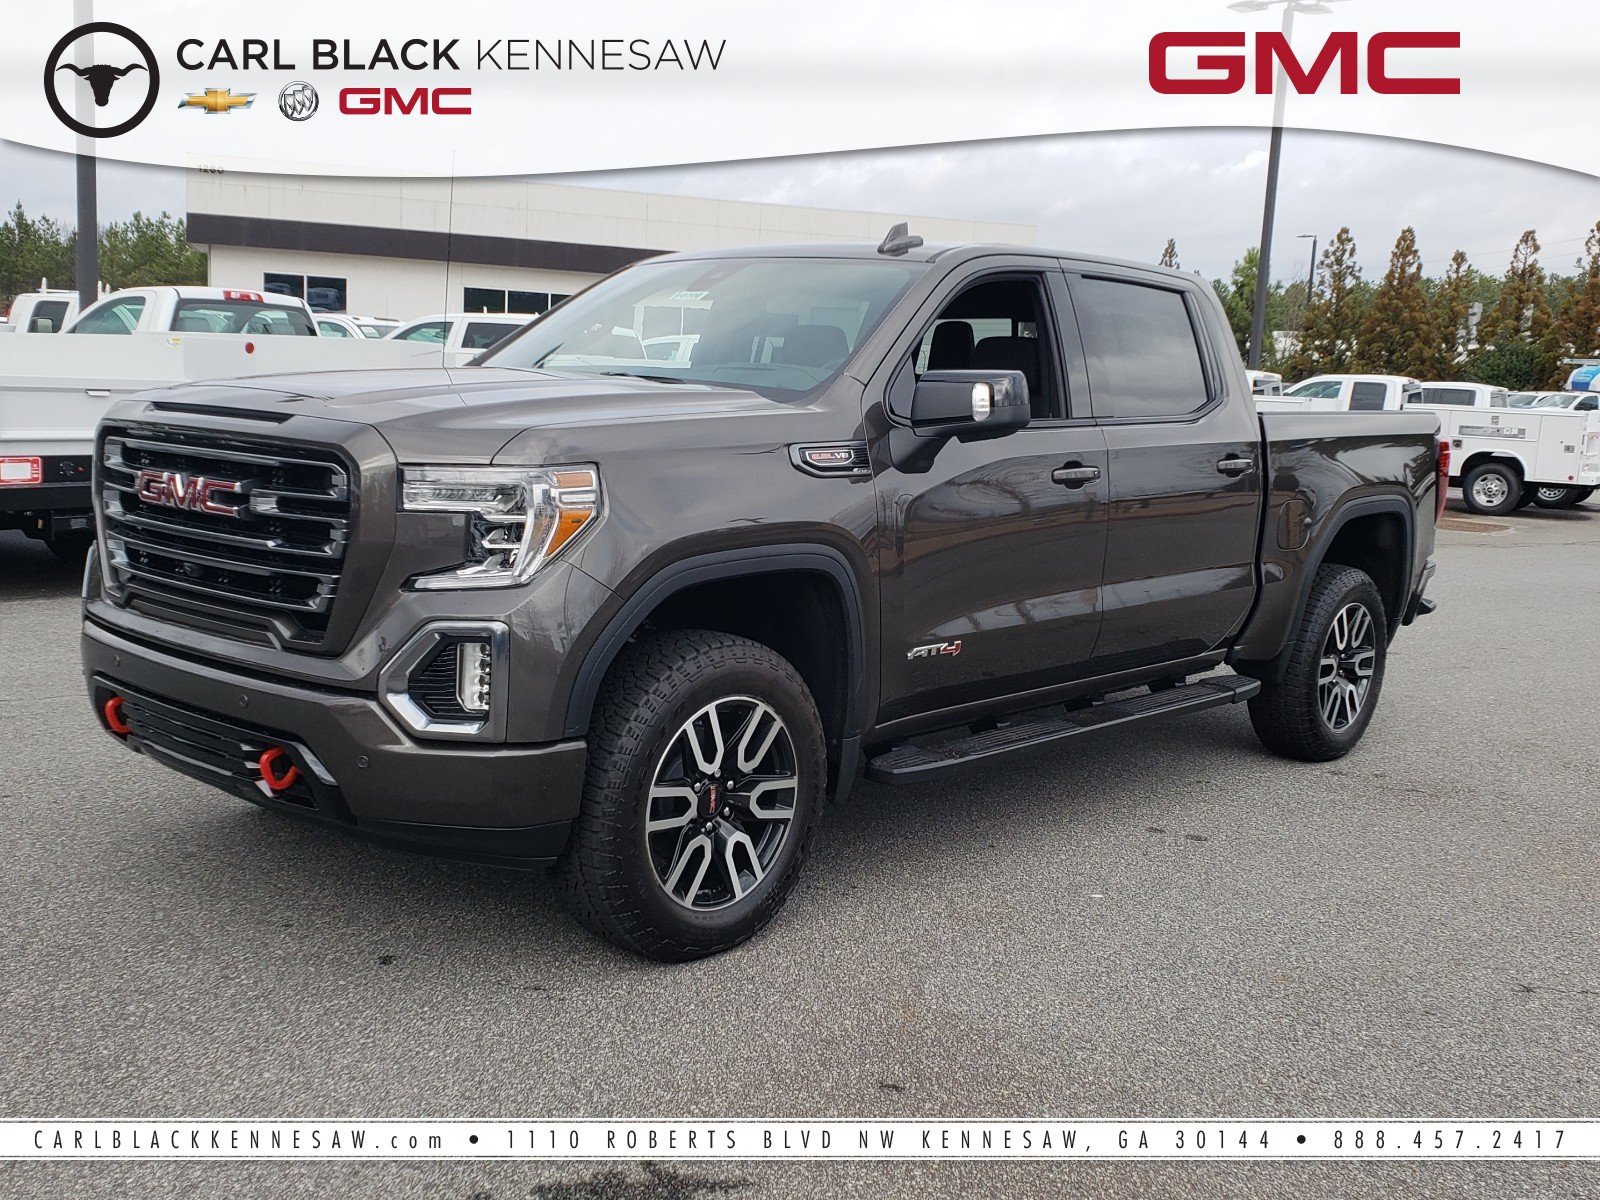 New 2019 Gmc Sierra 1500 At4 Crew Cab Pickup In Kennesaw 1390700